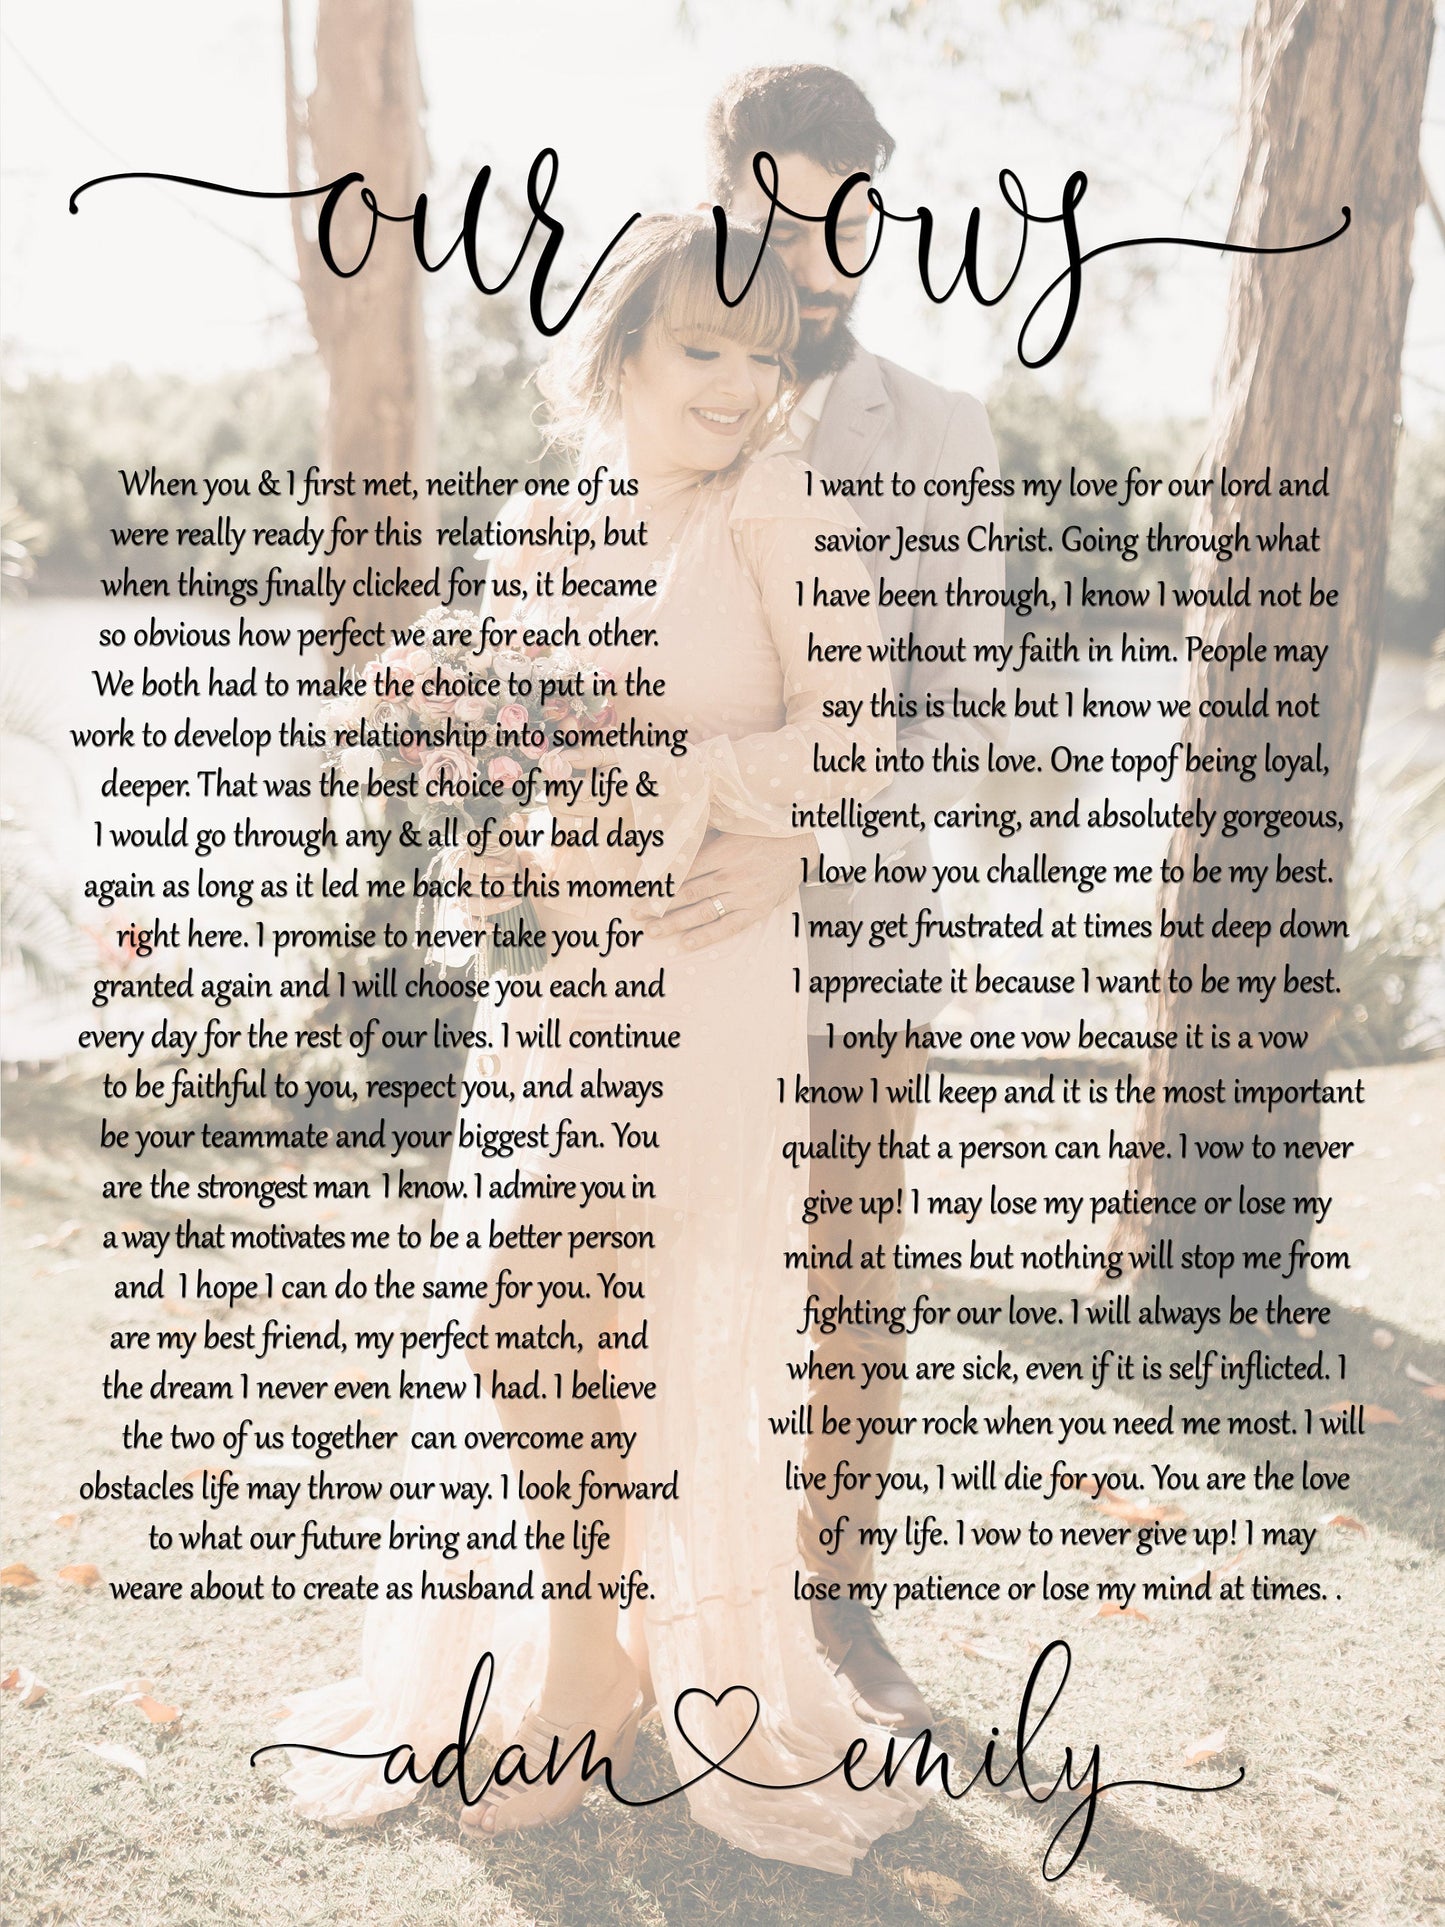 Custom Wedding Photo and Vows Canvas